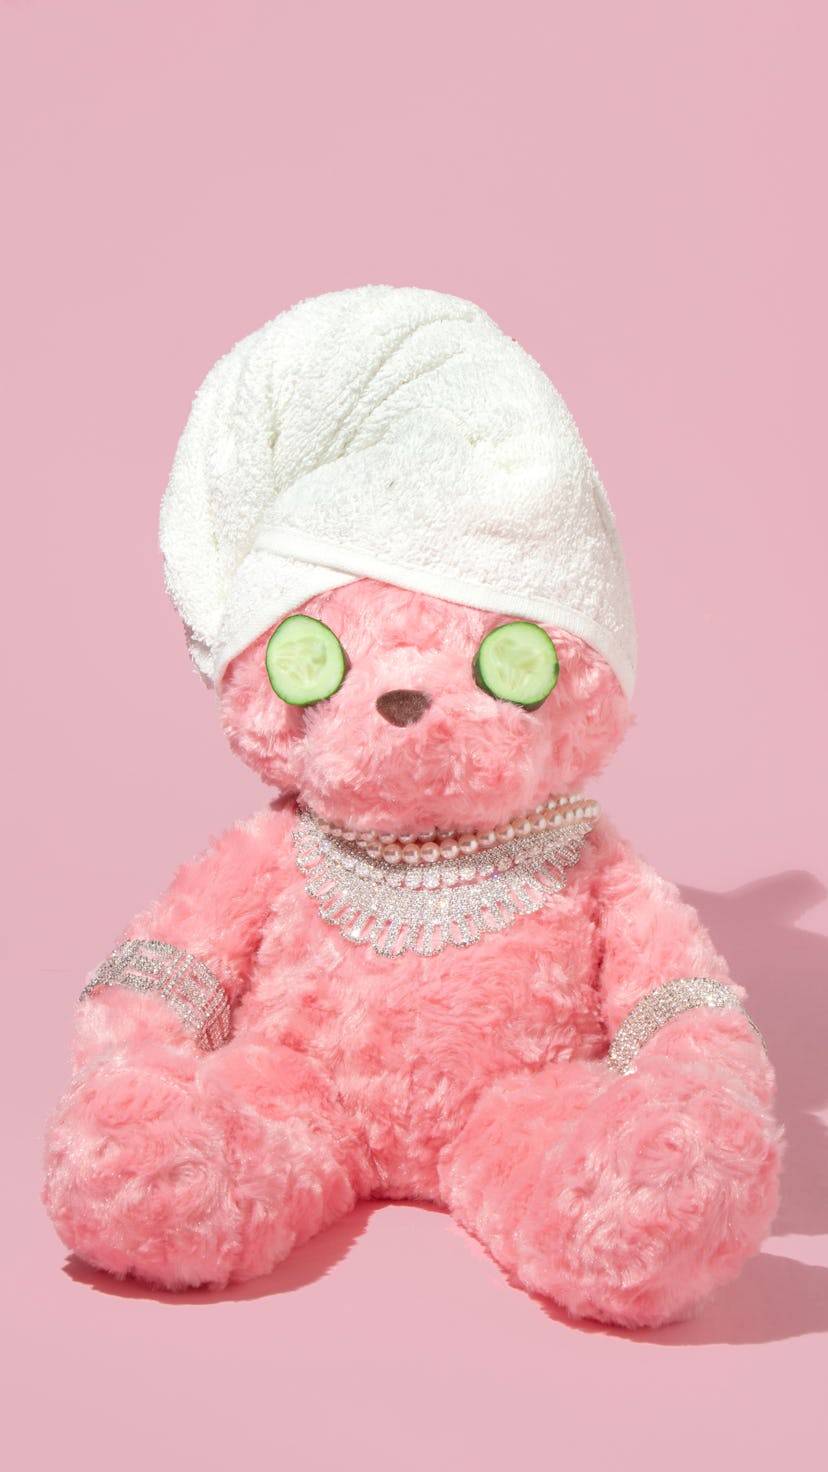 Creative layout with pink teddy bear with towel turban, cucumber slices and luxury jewelry on pastel...